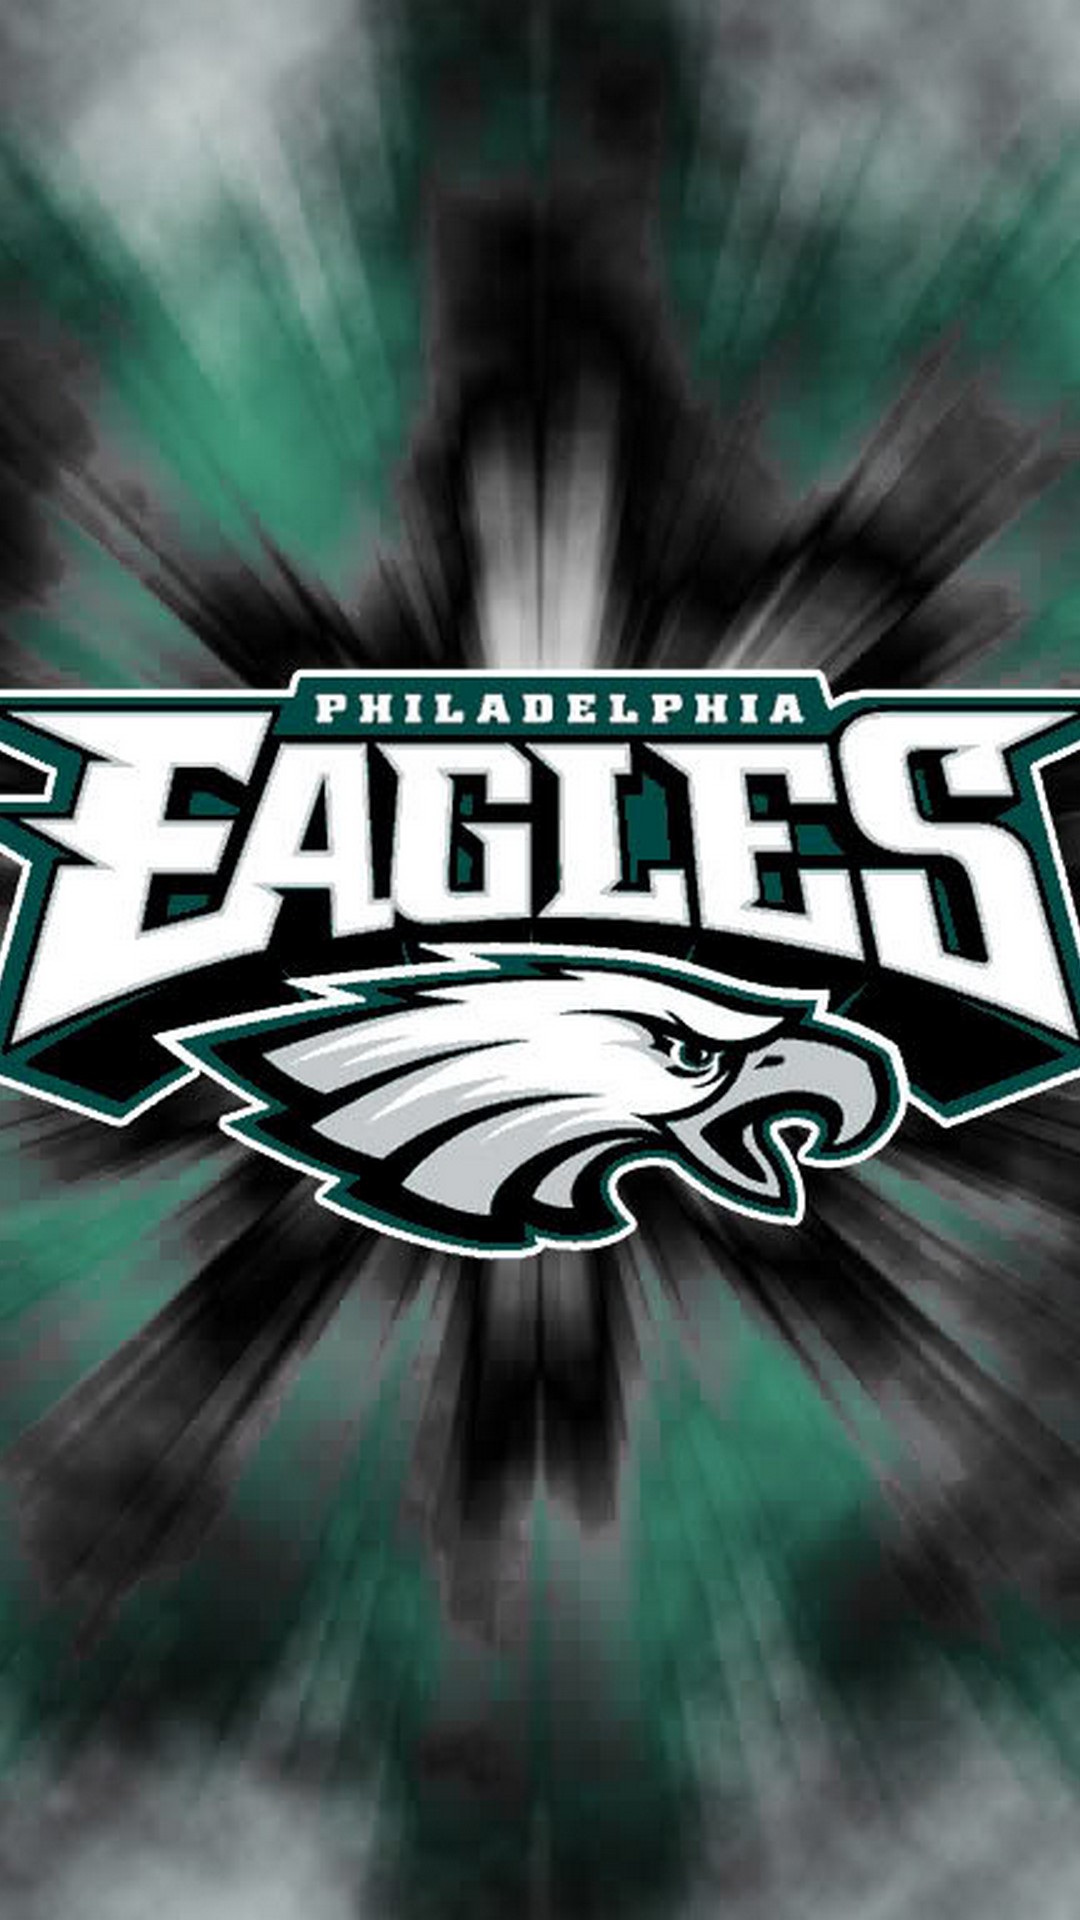 The Eagles HD Wallpaper For iPhone with resolution 1080x1920 pixel. You can make this wallpaper for your Mac or Windows Desktop Background, iPhone, Android or Tablet and another Smartphone device